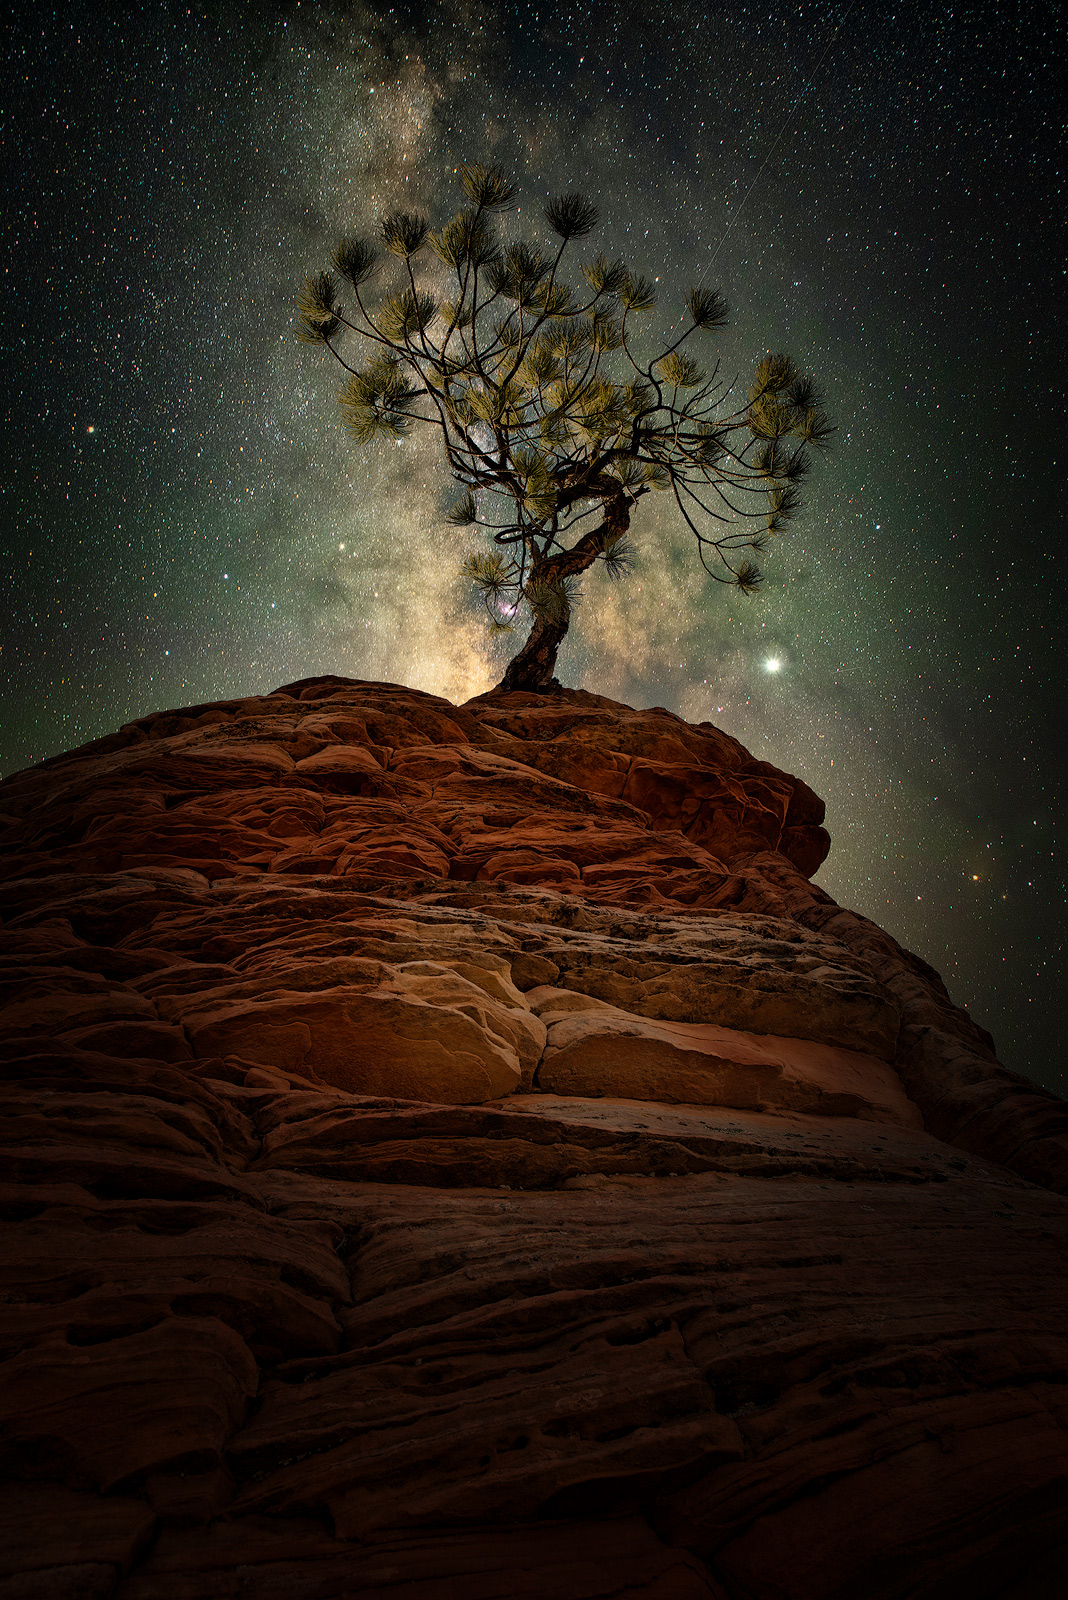 zion national park, milky way, astrophography, night sky, lonely tree, red rocks, zion, national park, beautiful scenery, stars...